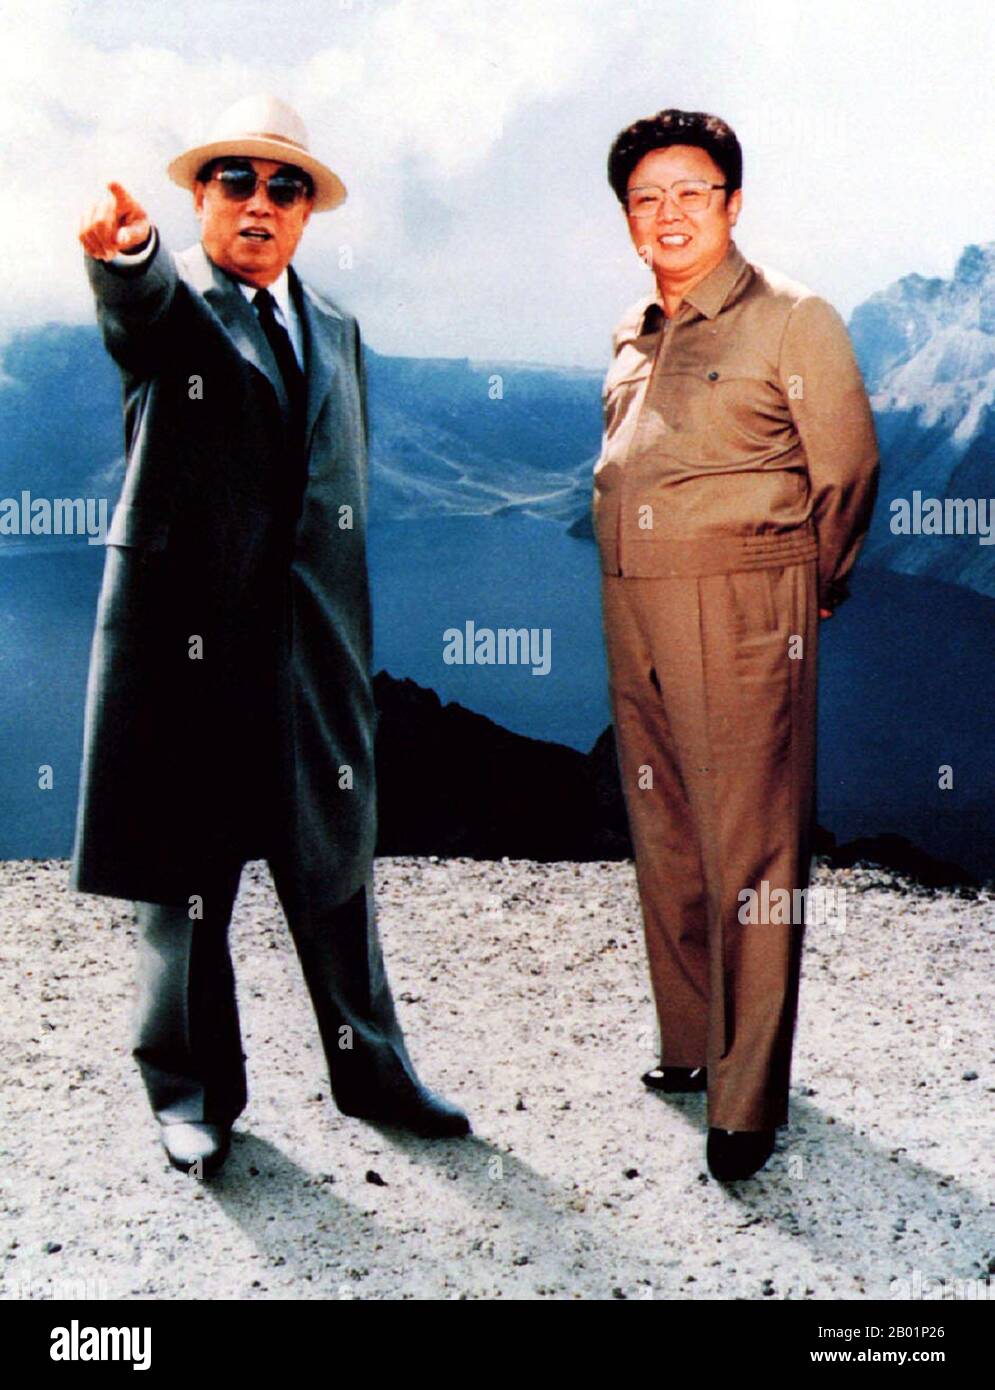 Korea: Propaganda photograph of North Korean leader Kim Il Sung together wth his heir and successor Kim Jong Il atop Mt. Baekdu on the Chinese border, c. 1990s.  Kim Il-sung (15 April 1912 - 8 July 1994) was a Korean communist politician who ruled North Korea, officially the Democratic People's Republic of Korea, from its establishment in 1948 until his death in 1994. He held the posts of Prime Minister from 1948 to 1972 and President from 1972 to his death. He was also the leader of the Workers' Party of Korea from 1949 to 1994 (titled as chairman from 1949 to 1966). Stock Photo